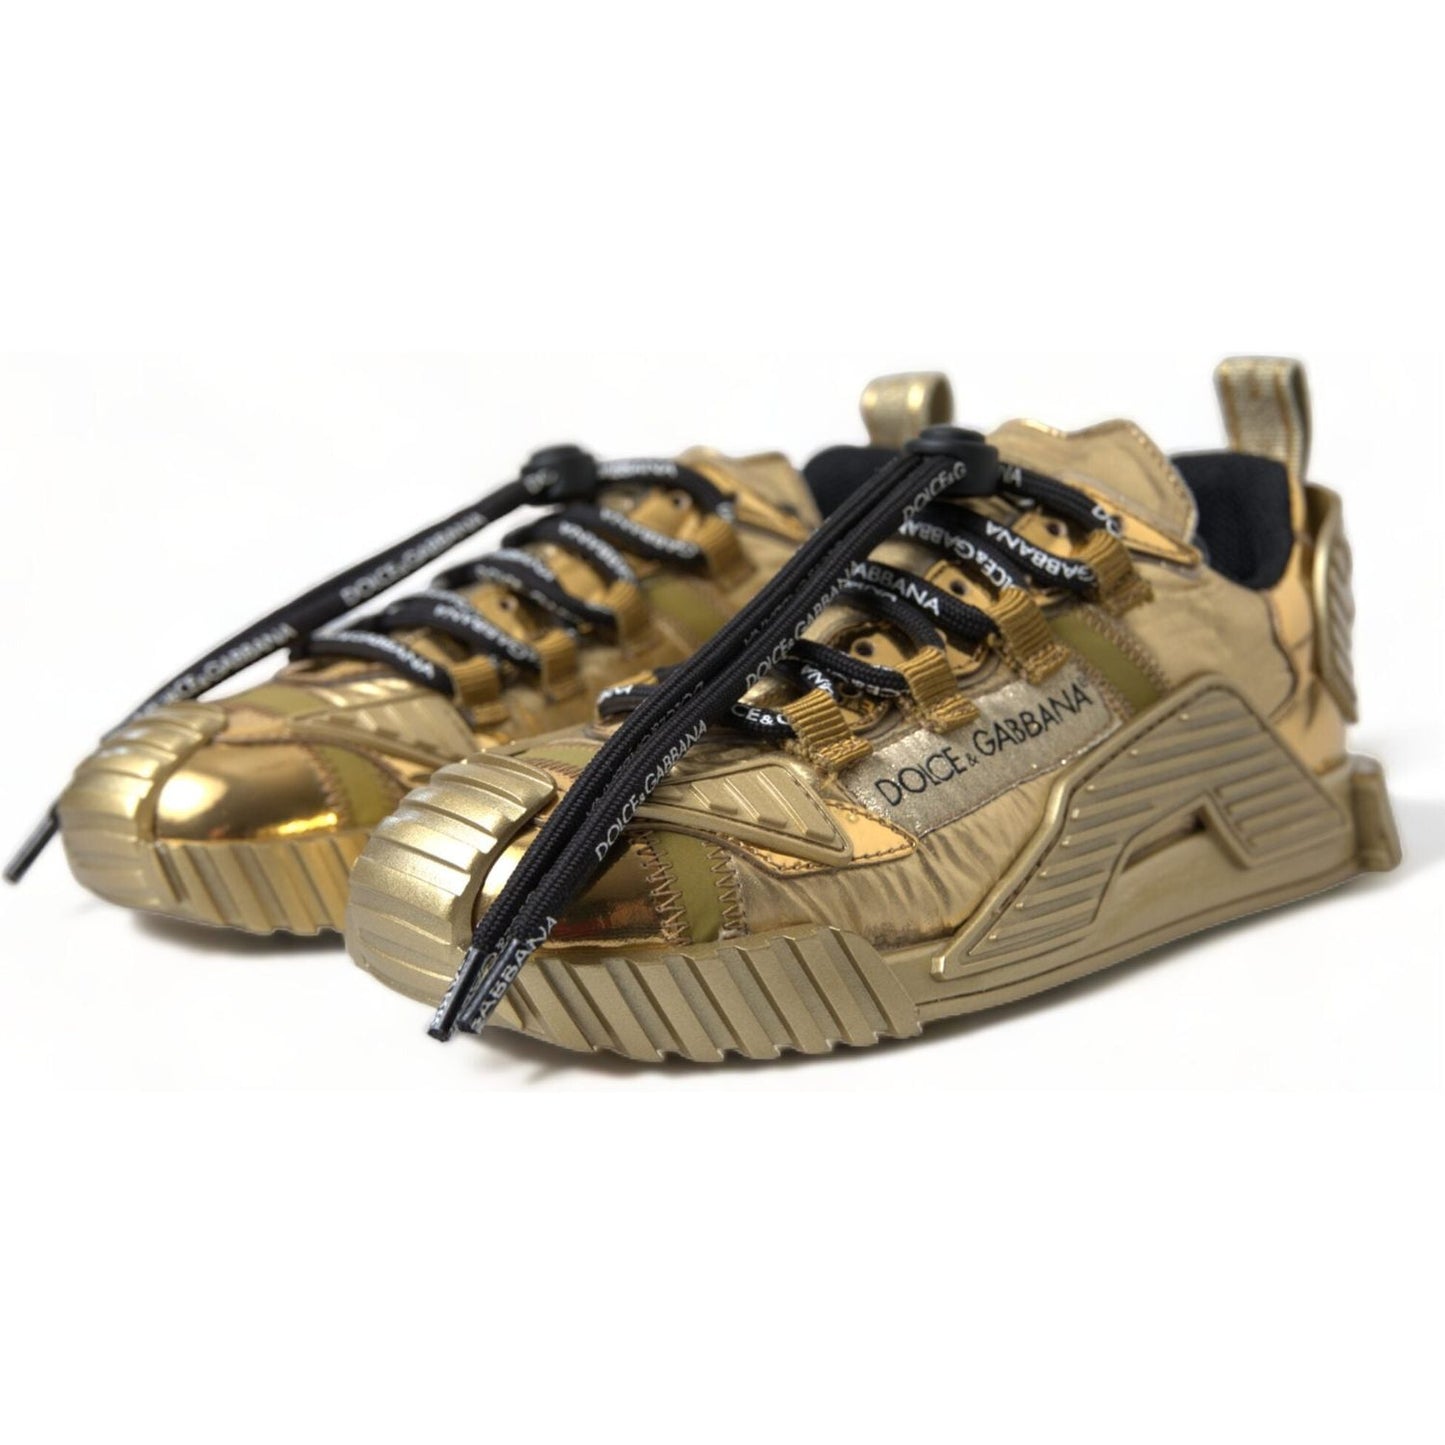 Dolce & Gabbana Gleaming Gold-Toned Luxury Sneakers metallic-gold-ns1-low-top-sneakers-shoes